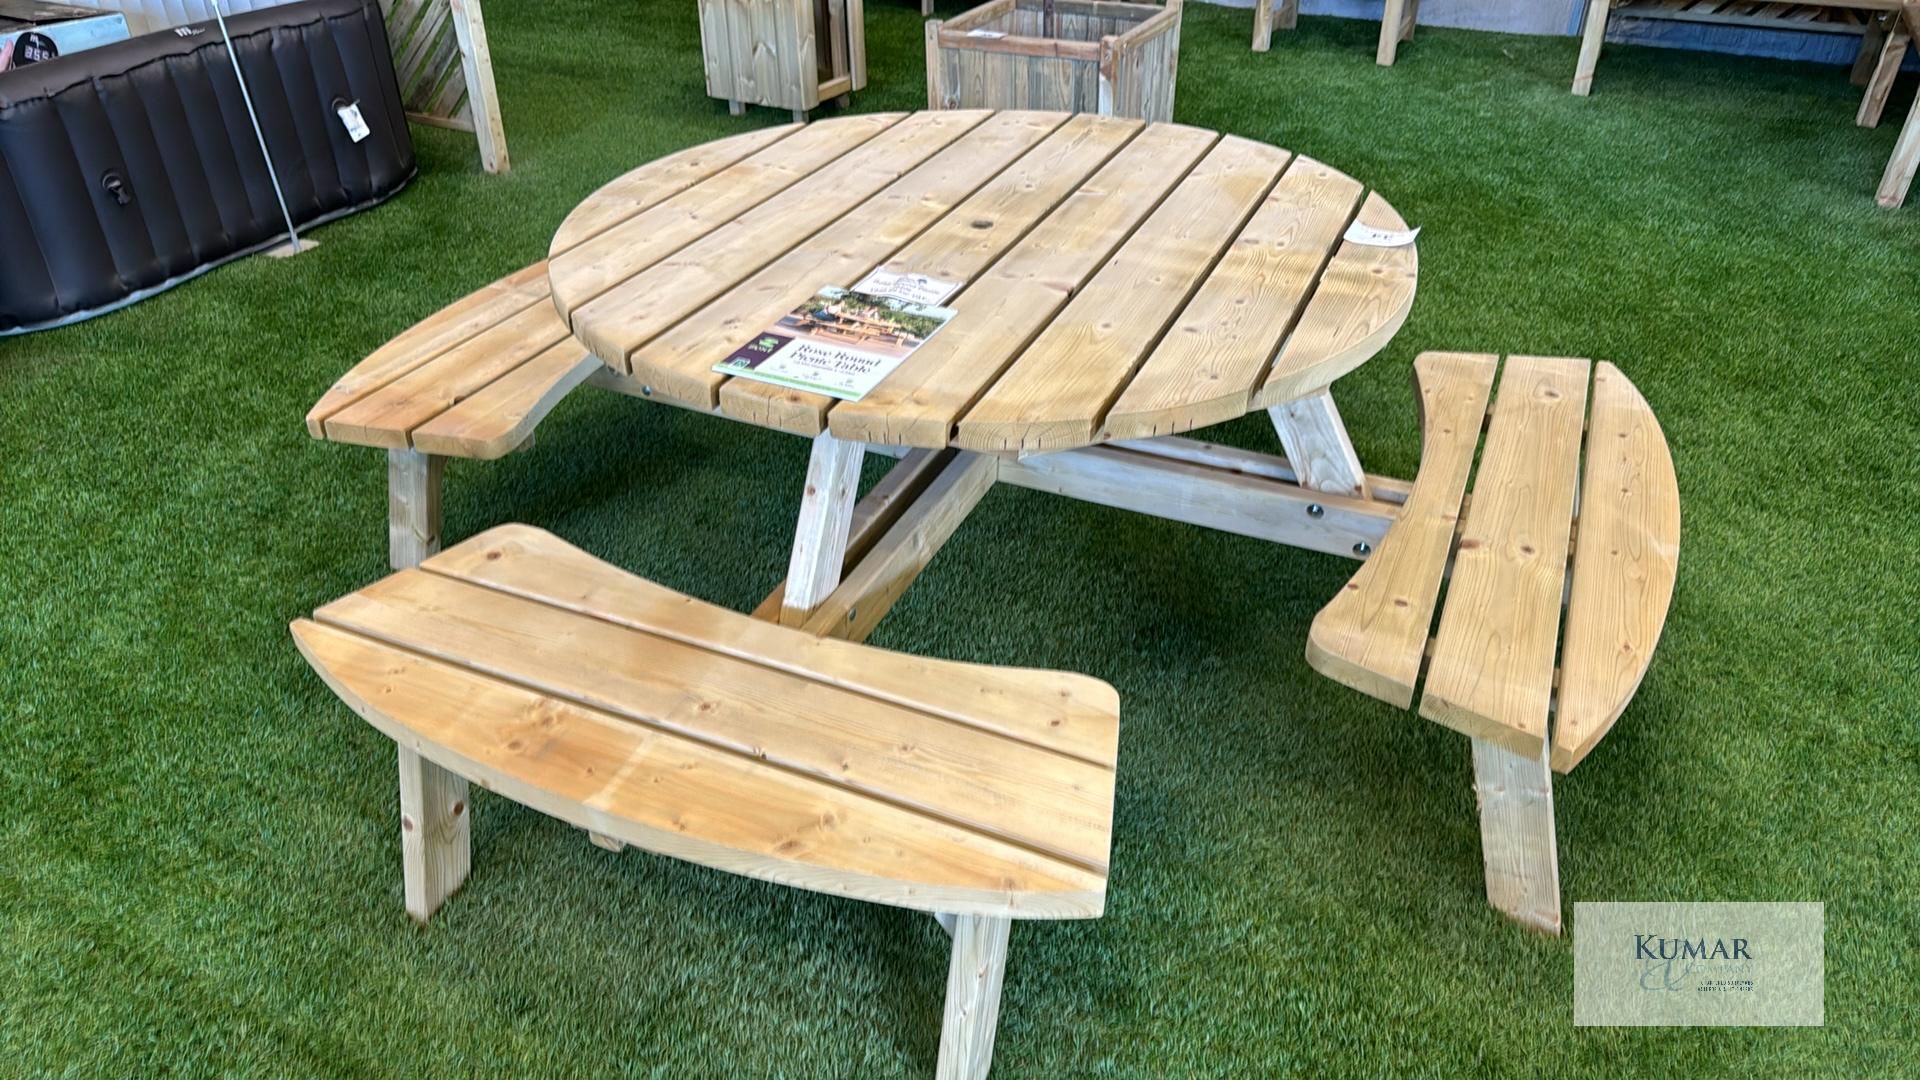 Rose Round Picnic Table w2.10m x h 2.23m, RRP £555.99